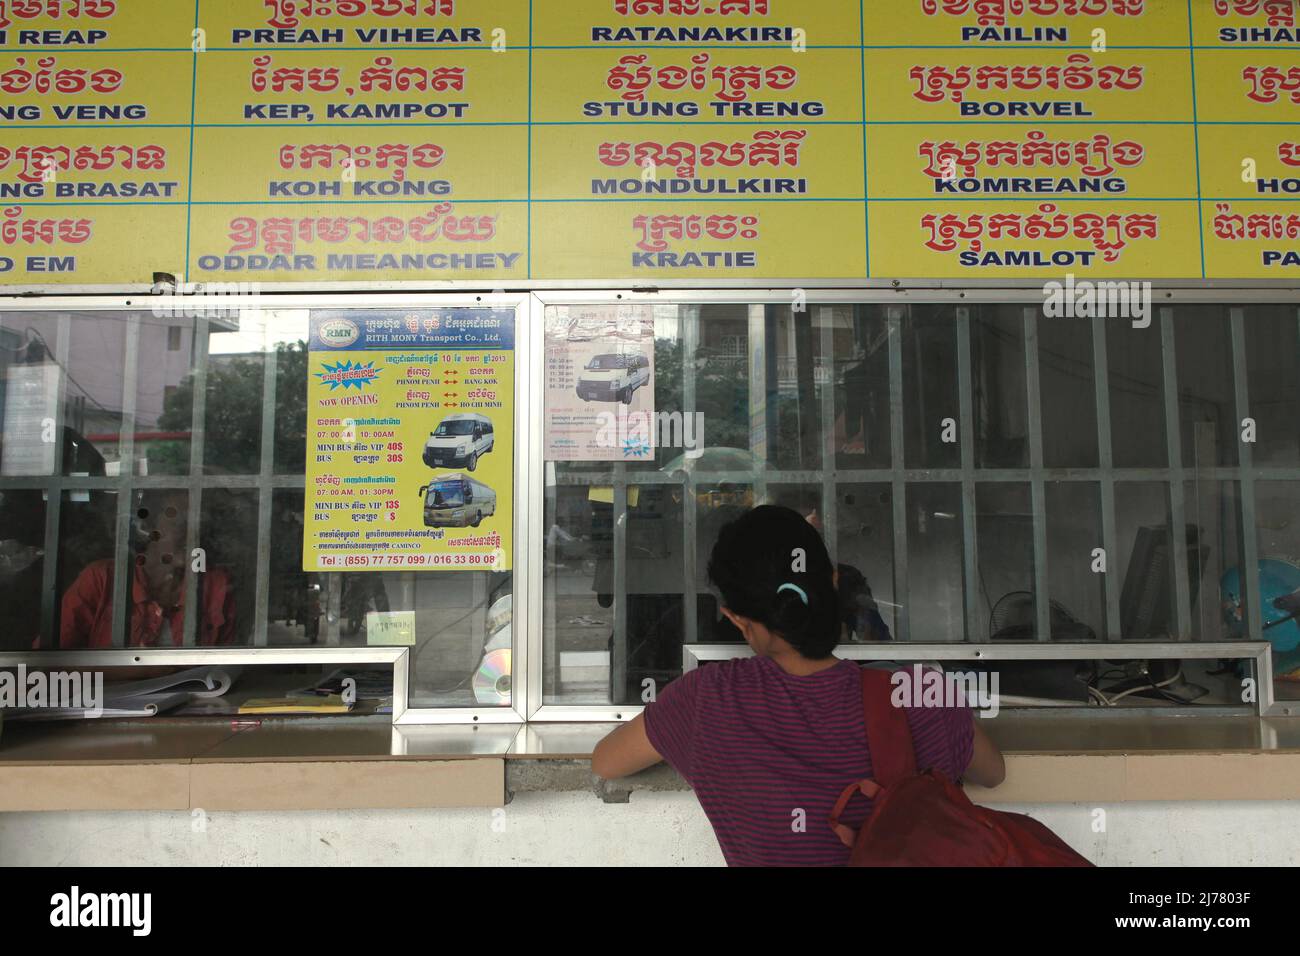 A woman buying bus ticket at the ticket counter of an intercity bus station in Phnom Penh, Cambodia. Stock Photo